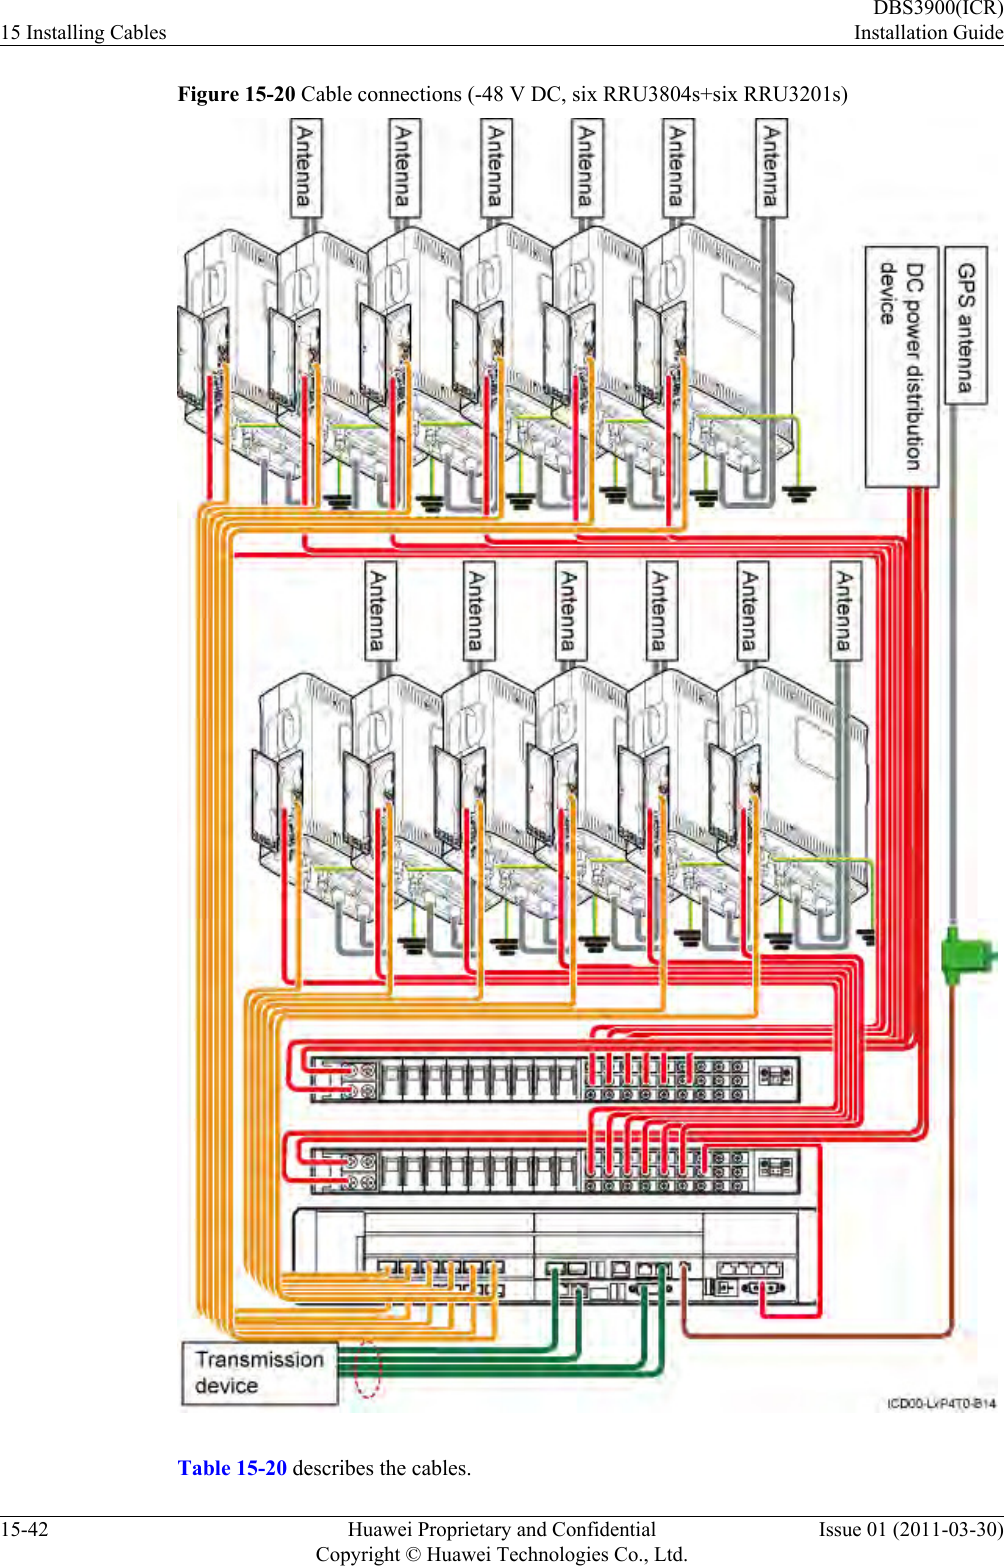 Figure 15-20 Cable connections (-48 V DC, six RRU3804s+six RRU3201s)Table 15-20 describes the cables.15 Installing CablesDBS3900(ICR)Installation Guide15-42 Huawei Proprietary and ConfidentialCopyright © Huawei Technologies Co., Ltd.Issue 01 (2011-03-30)